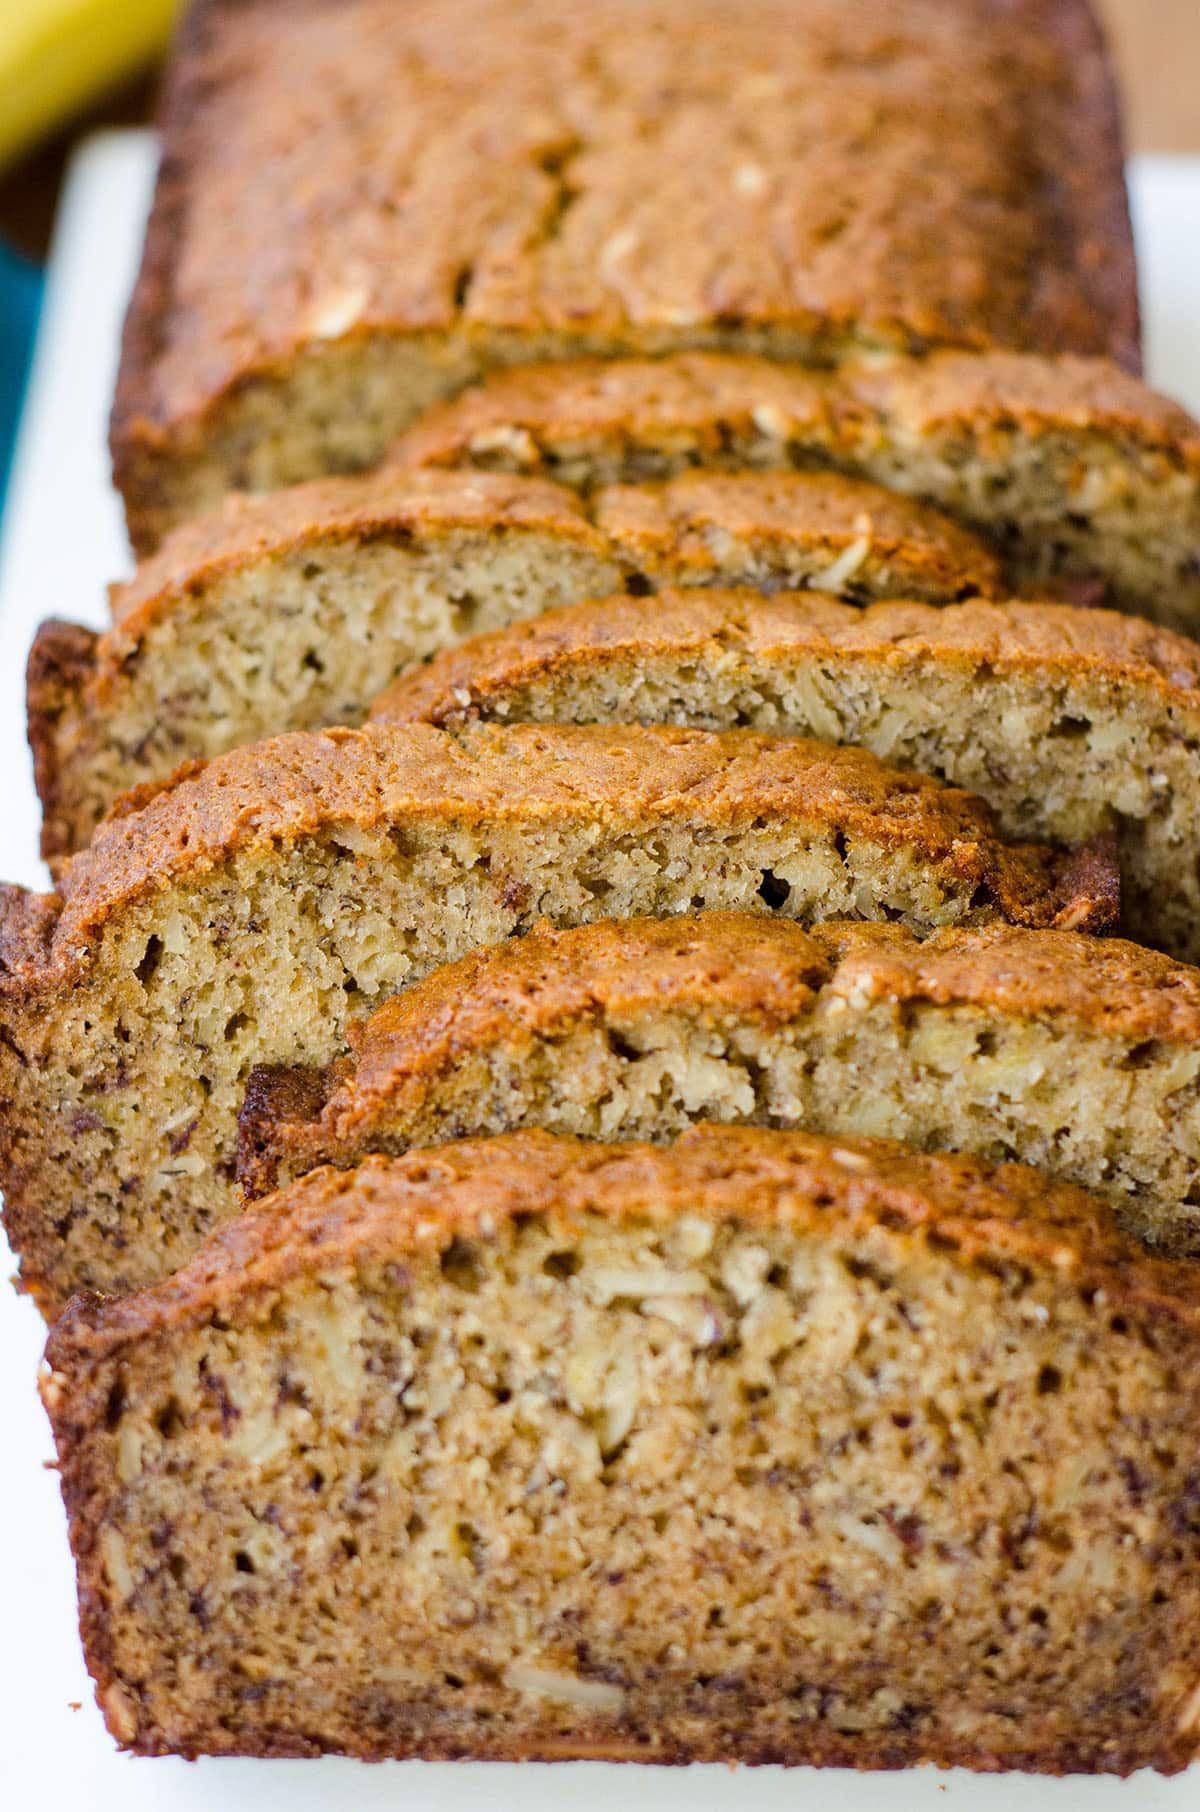 Classic Banana Bread: Spiced with a touch of cinnamon and studded with nuts, not much beats this classic quick bread!